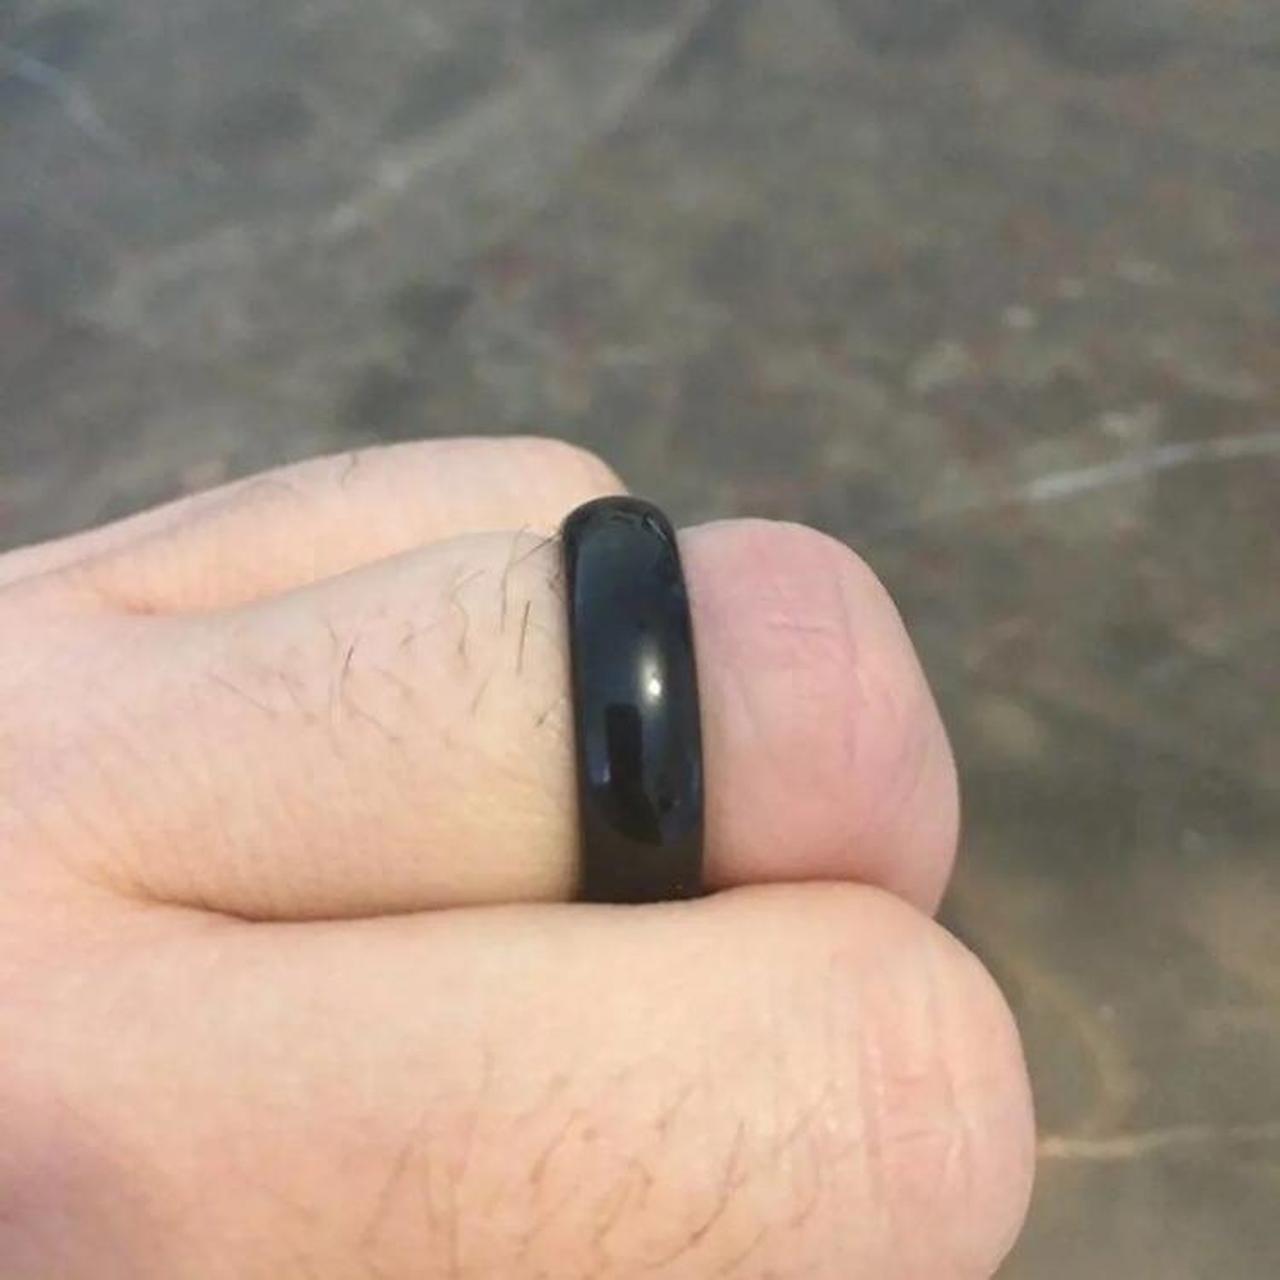 Product Image 4 - Black obsidian ring size 6
condition: